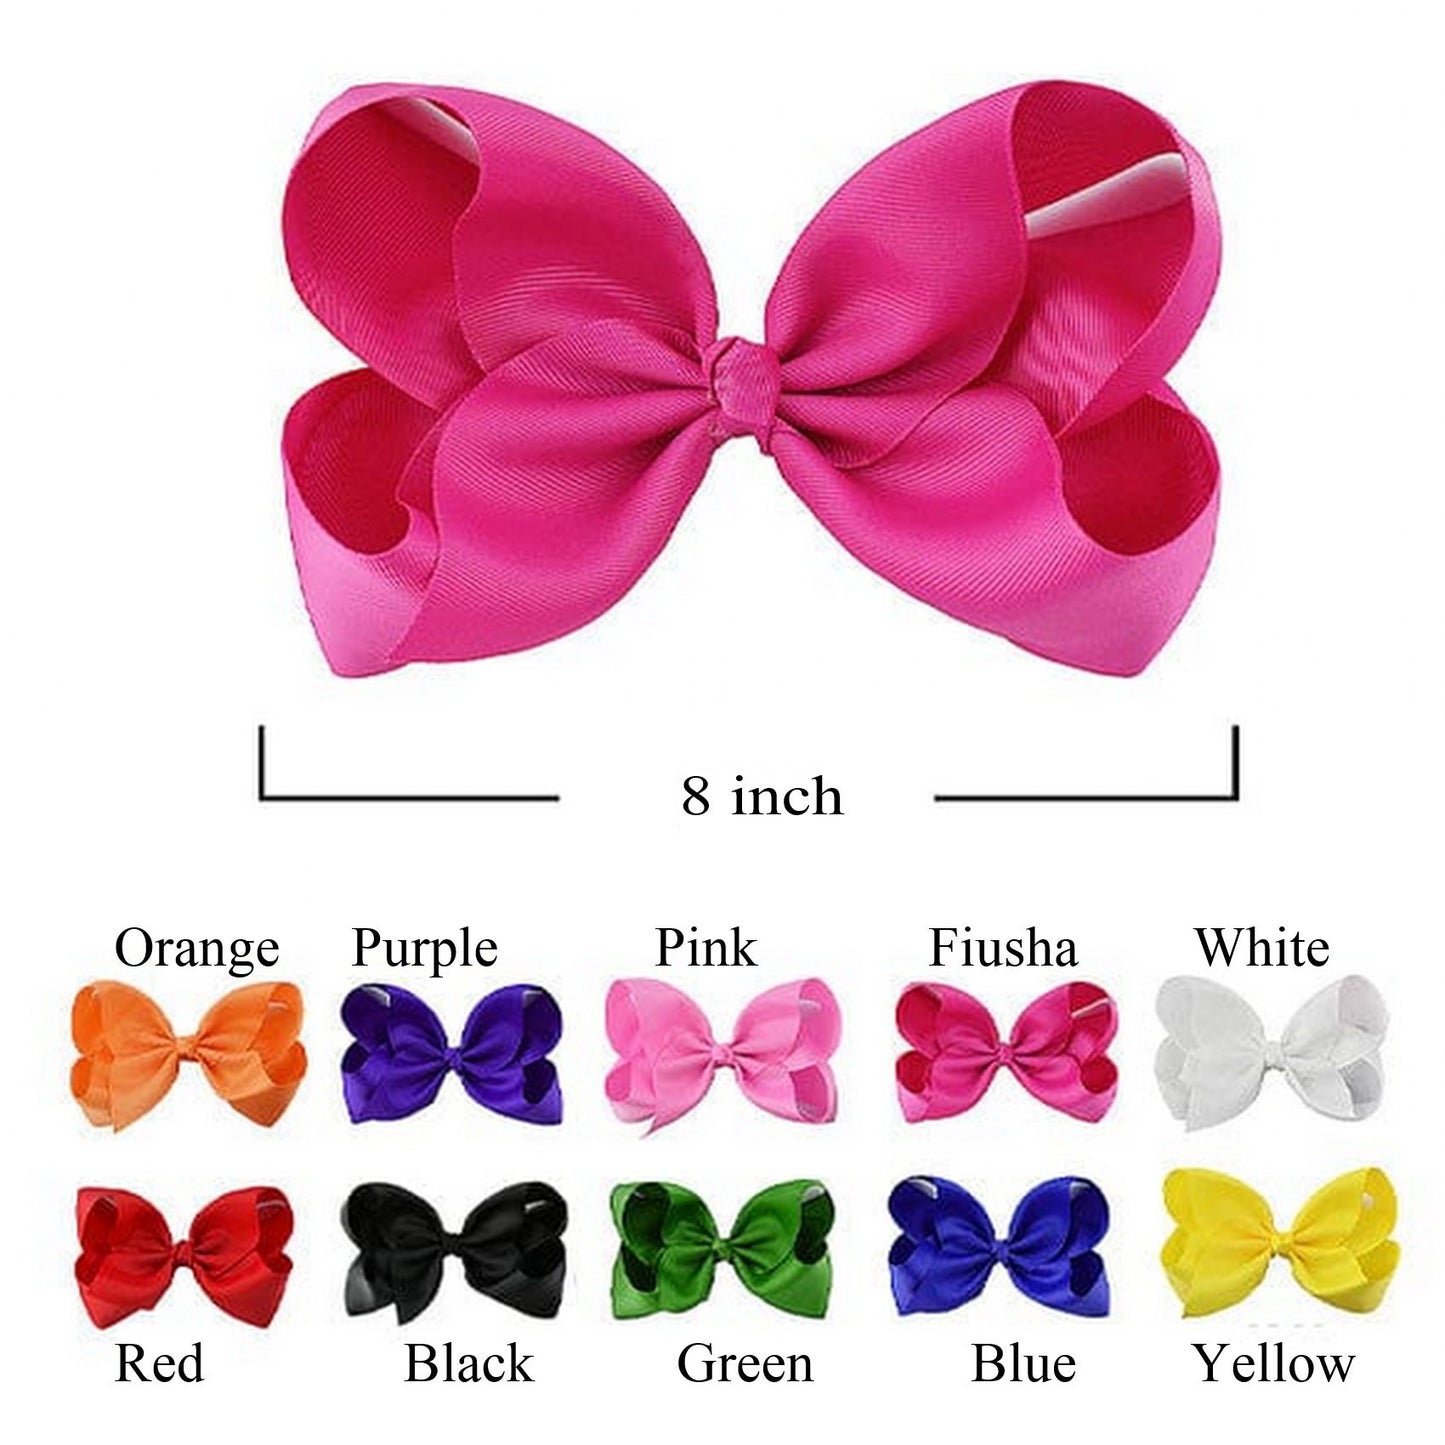 Large 8 inch Size Solid Hair Bow 26197R